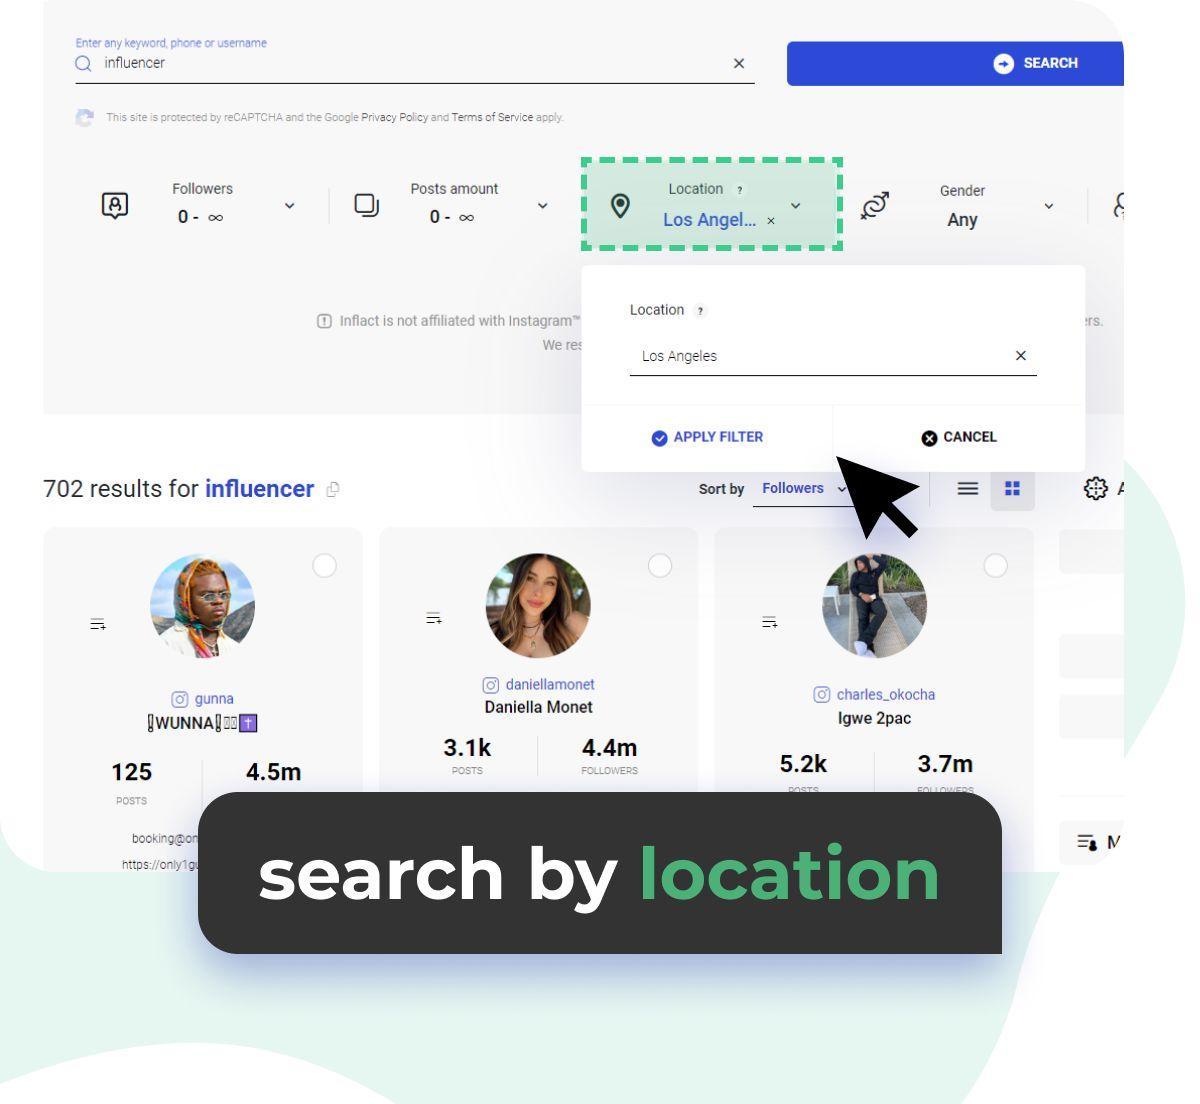 search by location in insta